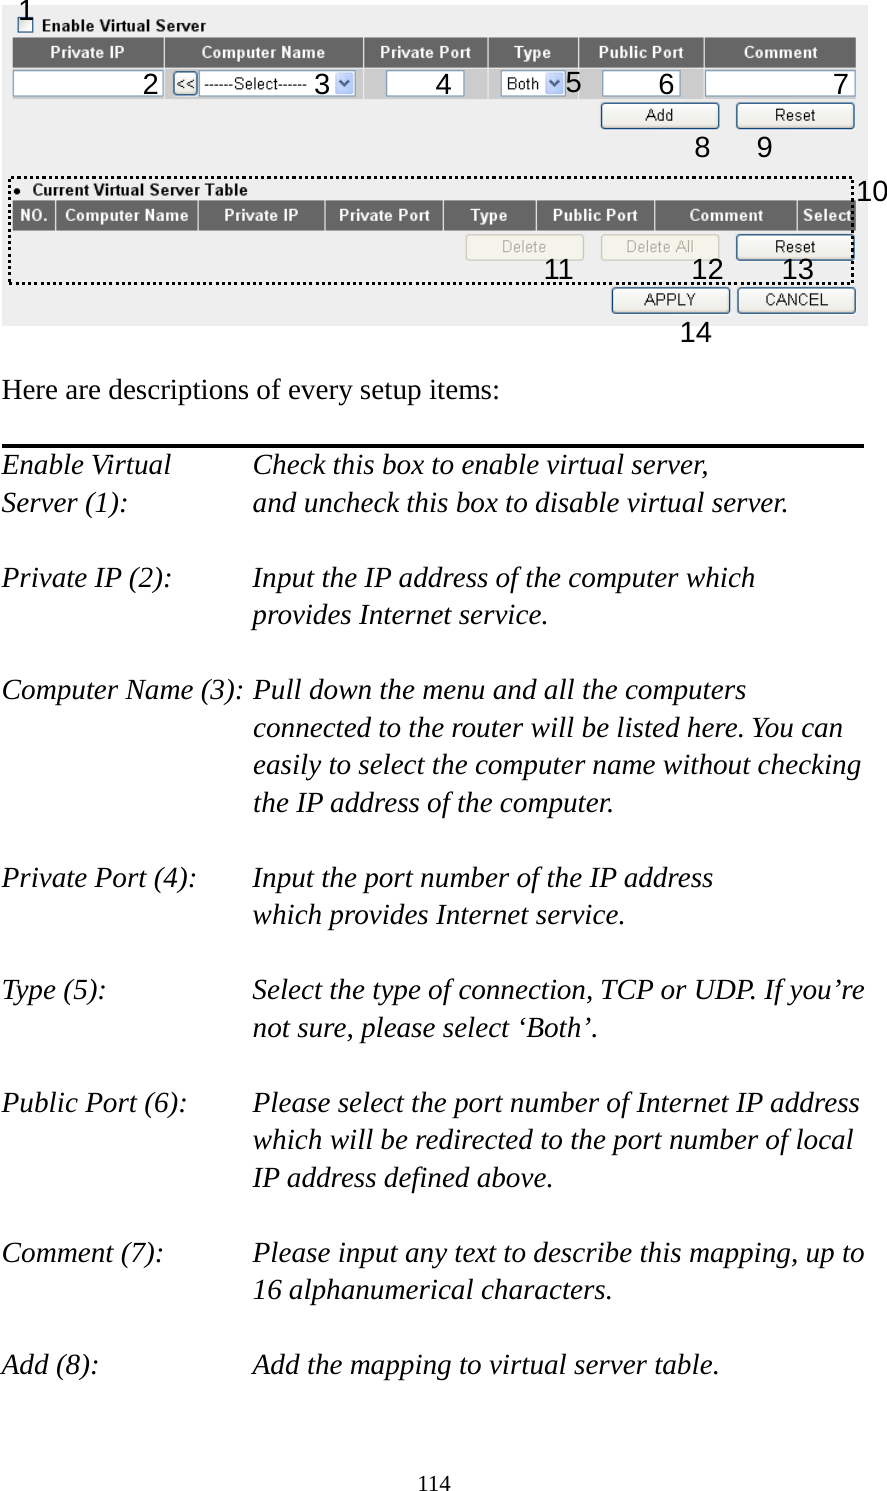 114   Here are descriptions of every setup items:  Enable Virtual      Check this box to enable virtual server, Server (1):       and uncheck this box to disable virtual server.  Private IP (2):      Input the IP address of the computer which      provides Internet service.  Computer Name (3): Pull down the menu and all the computers connected to the router will be listed here. You can easily to select the computer name without checking the IP address of the computer.  Private Port (4):    Input the port number of the IP address      which provides Internet service.  Type (5):    Select the type of connection, TCP or UDP. If you’re not sure, please select ‘Both’.  Public Port (6):    Please select the port number of Internet IP address which will be redirected to the port number of local IP address defined above.  Comment (7):    Please input any text to describe this mapping, up to 16 alphanumerical characters.  Add (8):        Add the mapping to virtual server table.  1 2 3 4 5 8  9 10 11 12 13 14 7 6 